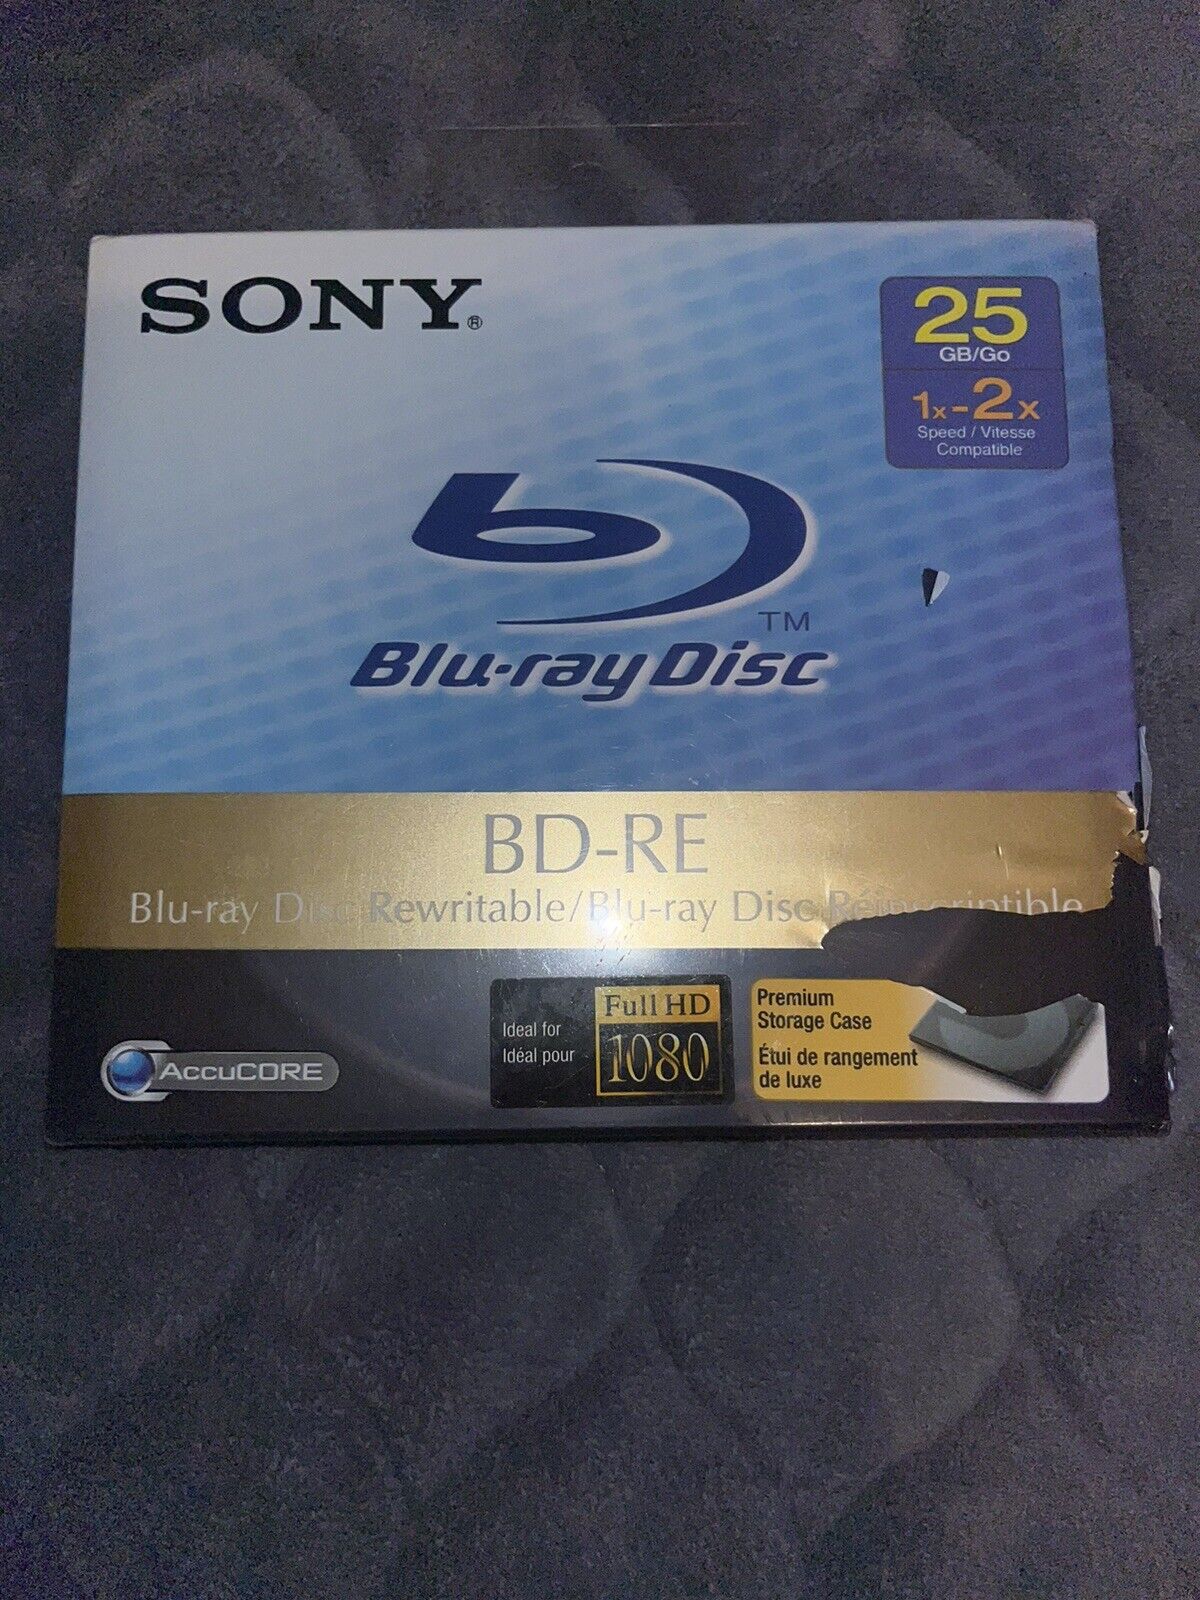 New - Sony Blu-Ray Disc BD-RE 25GB 1x-2x Speed Rewritable AccuCore